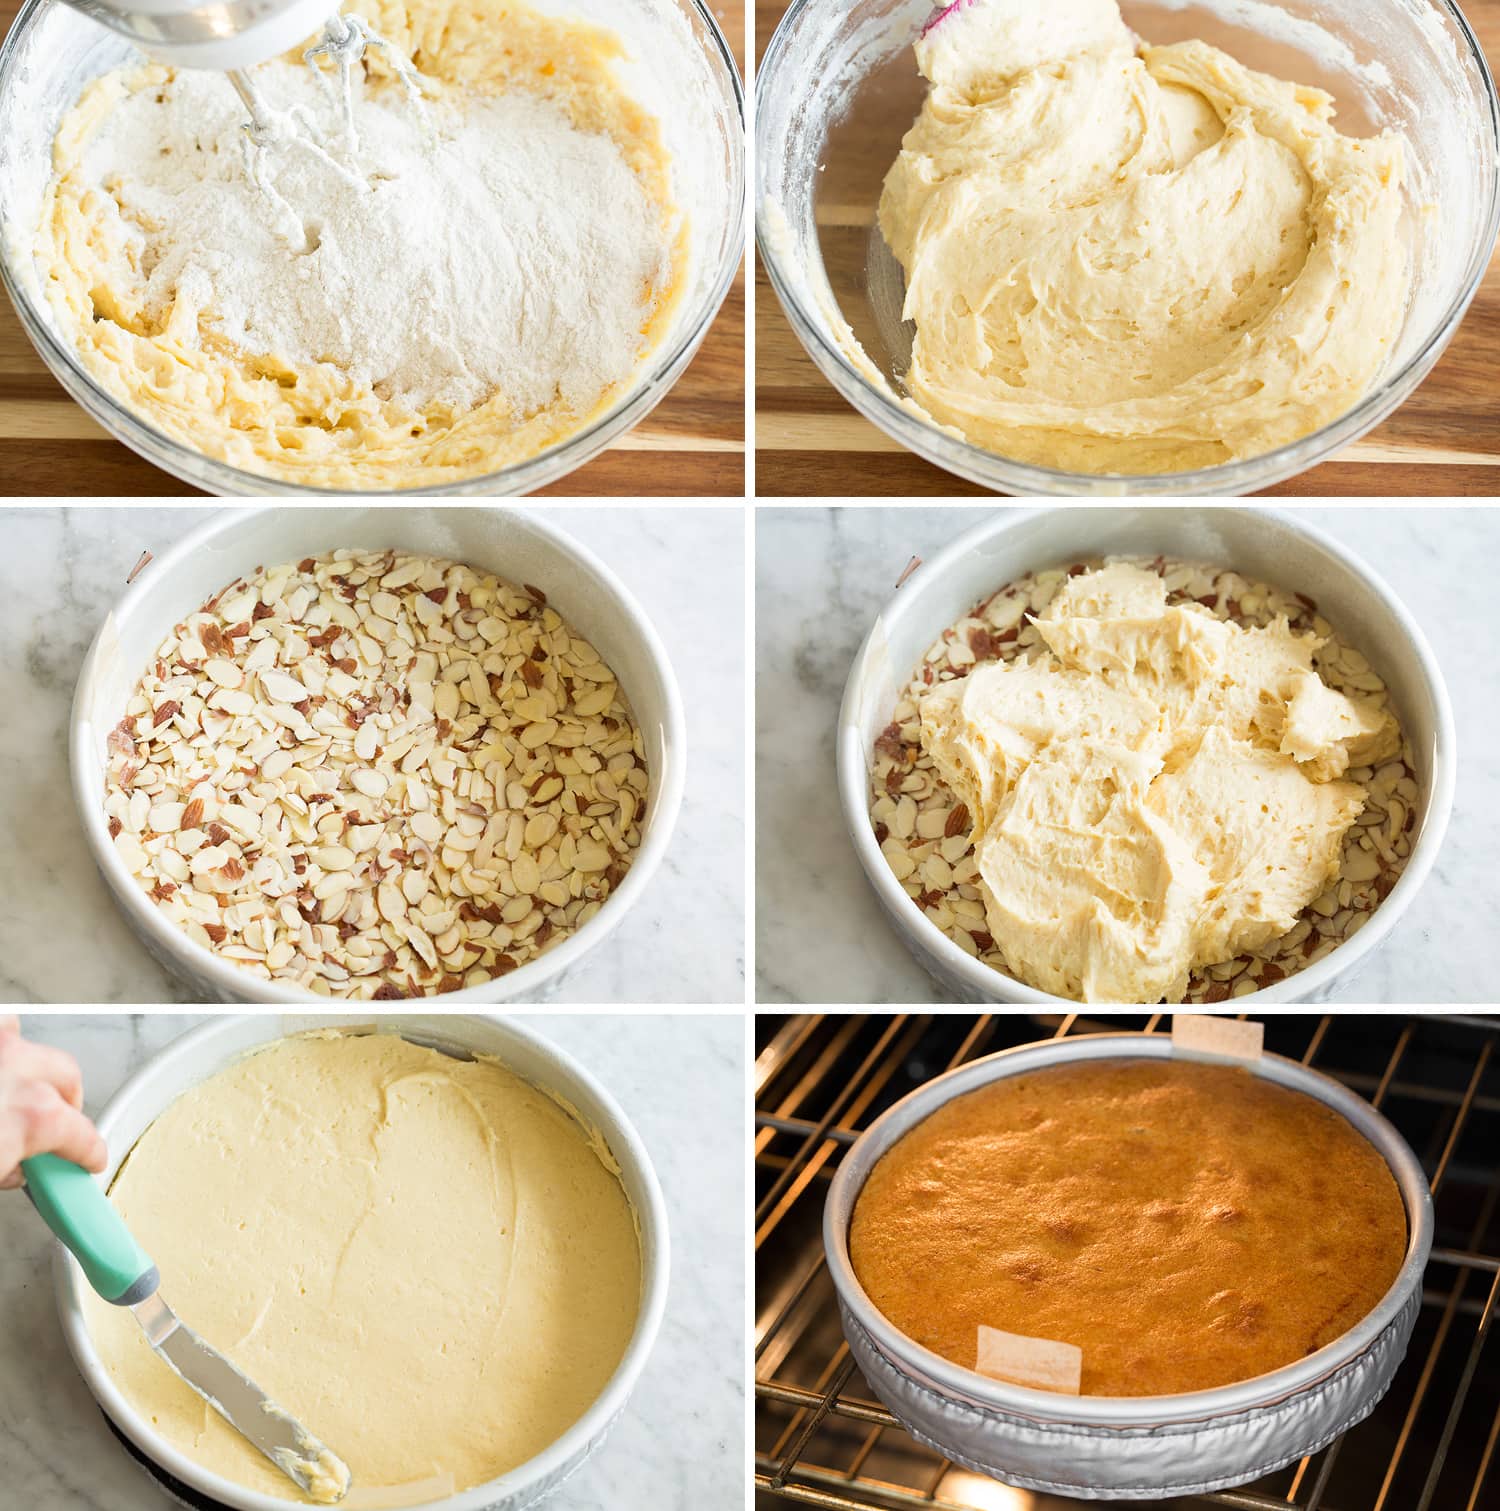 Six steps showing how to finish batter and spread into prepared cake pan and bake.